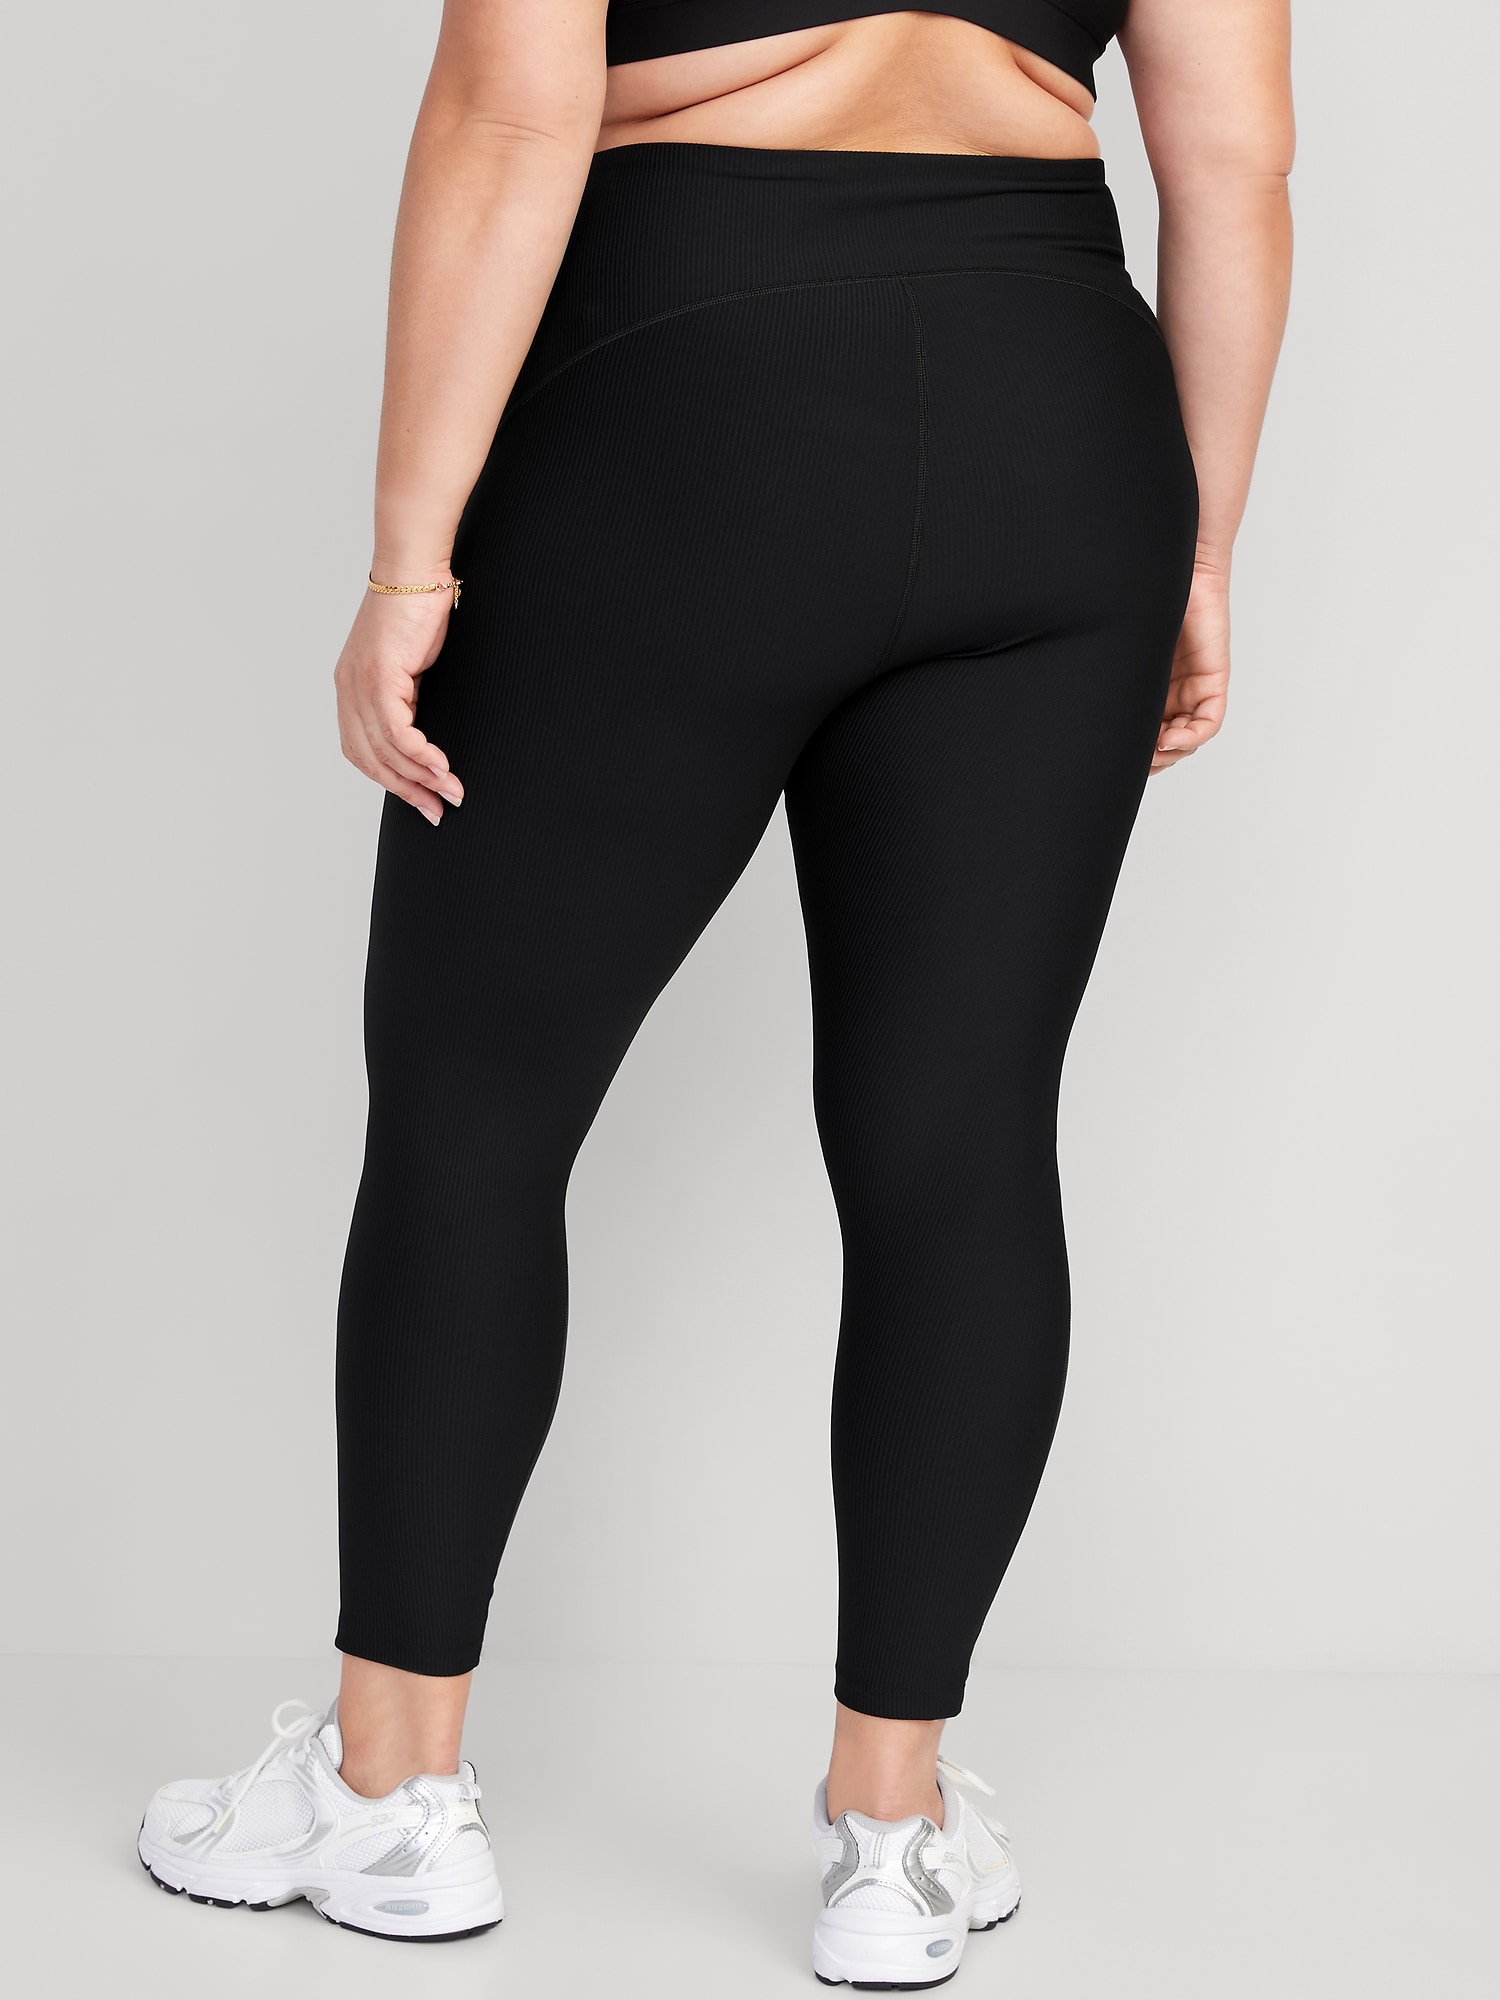 High-Waisted PowerSoft 7/8 Mixed-Fabric Leggings